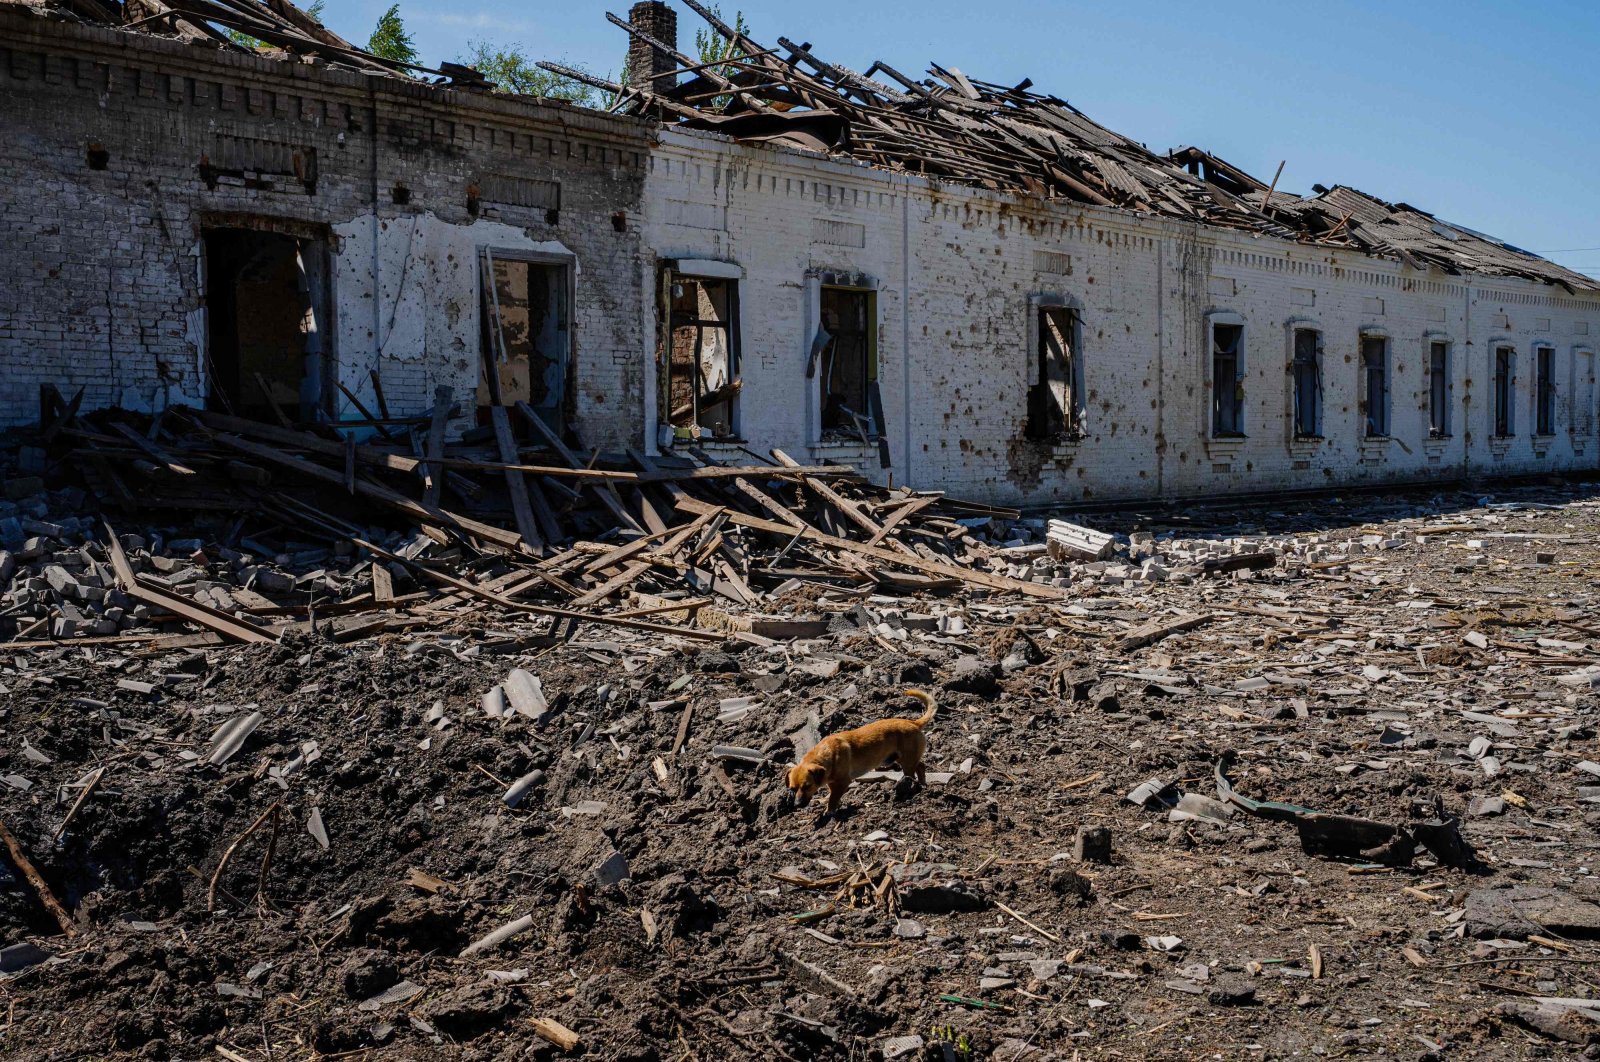 A dog walks on the debris of a destroyed building after an aerial bombing in the town of Orikhiv, in the Zaporizhzhia region, on May 7, 2023, amid the Russian invasion of Ukraine. (AFP Photo)